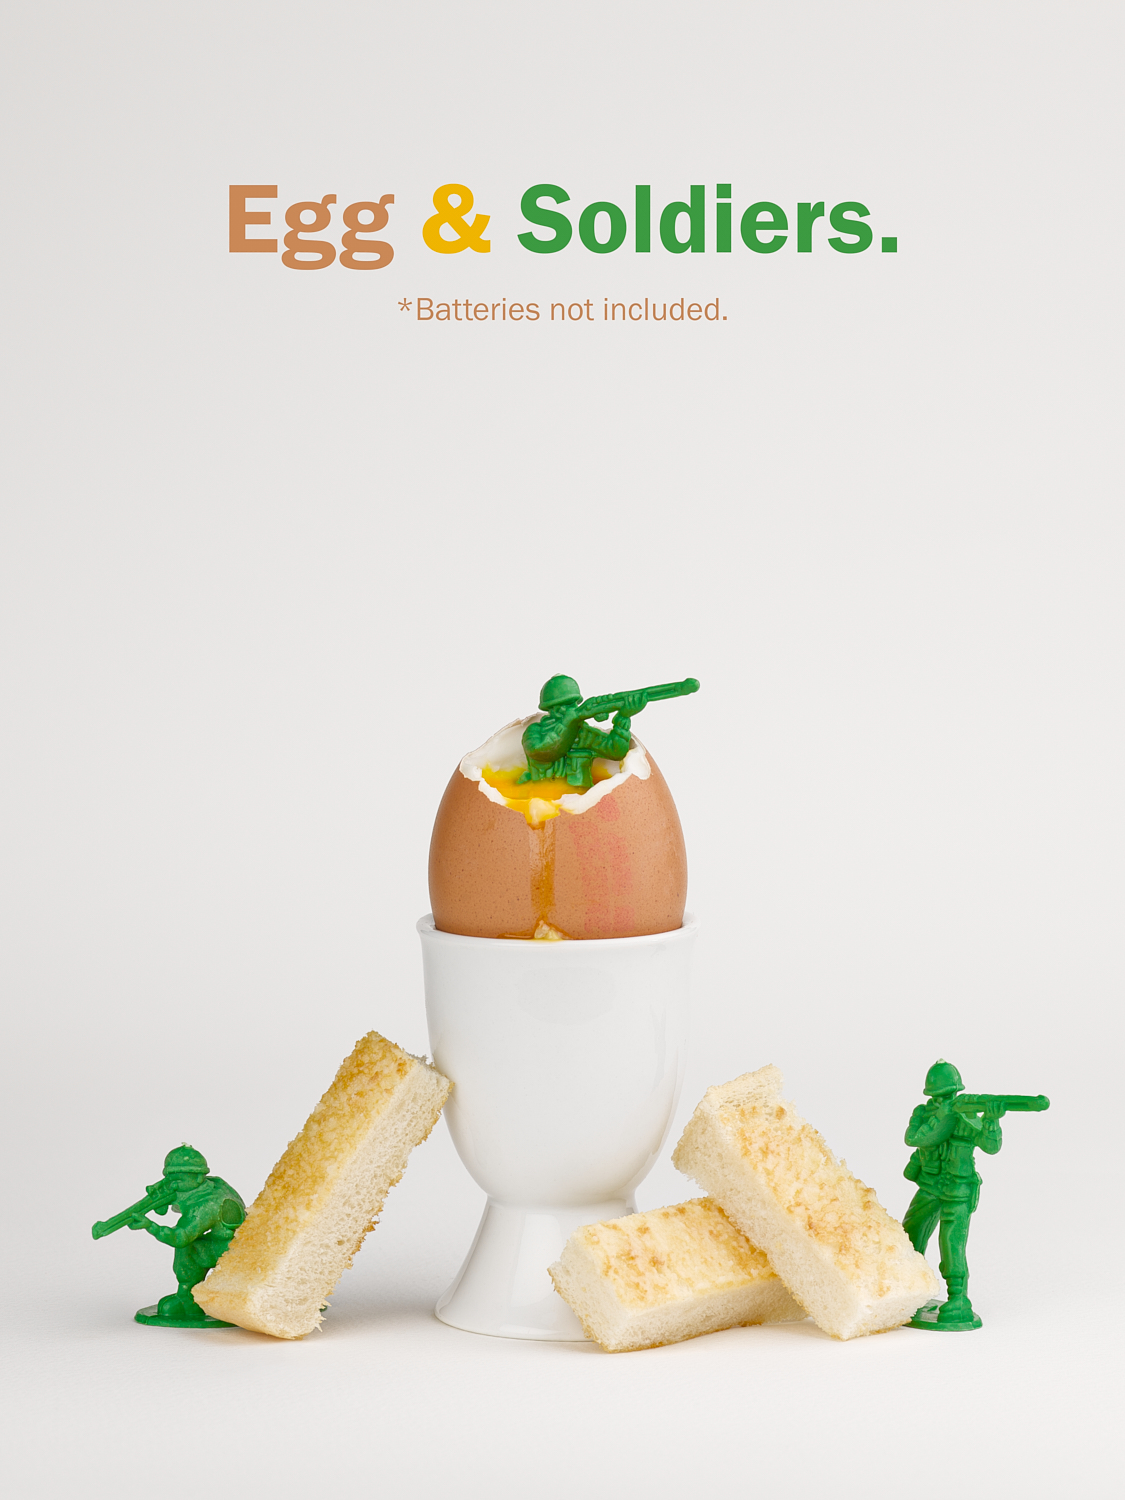 A photograph by Joey Rolph, depicting green toy soldiers posted around a dippy egg and toast soldiers.